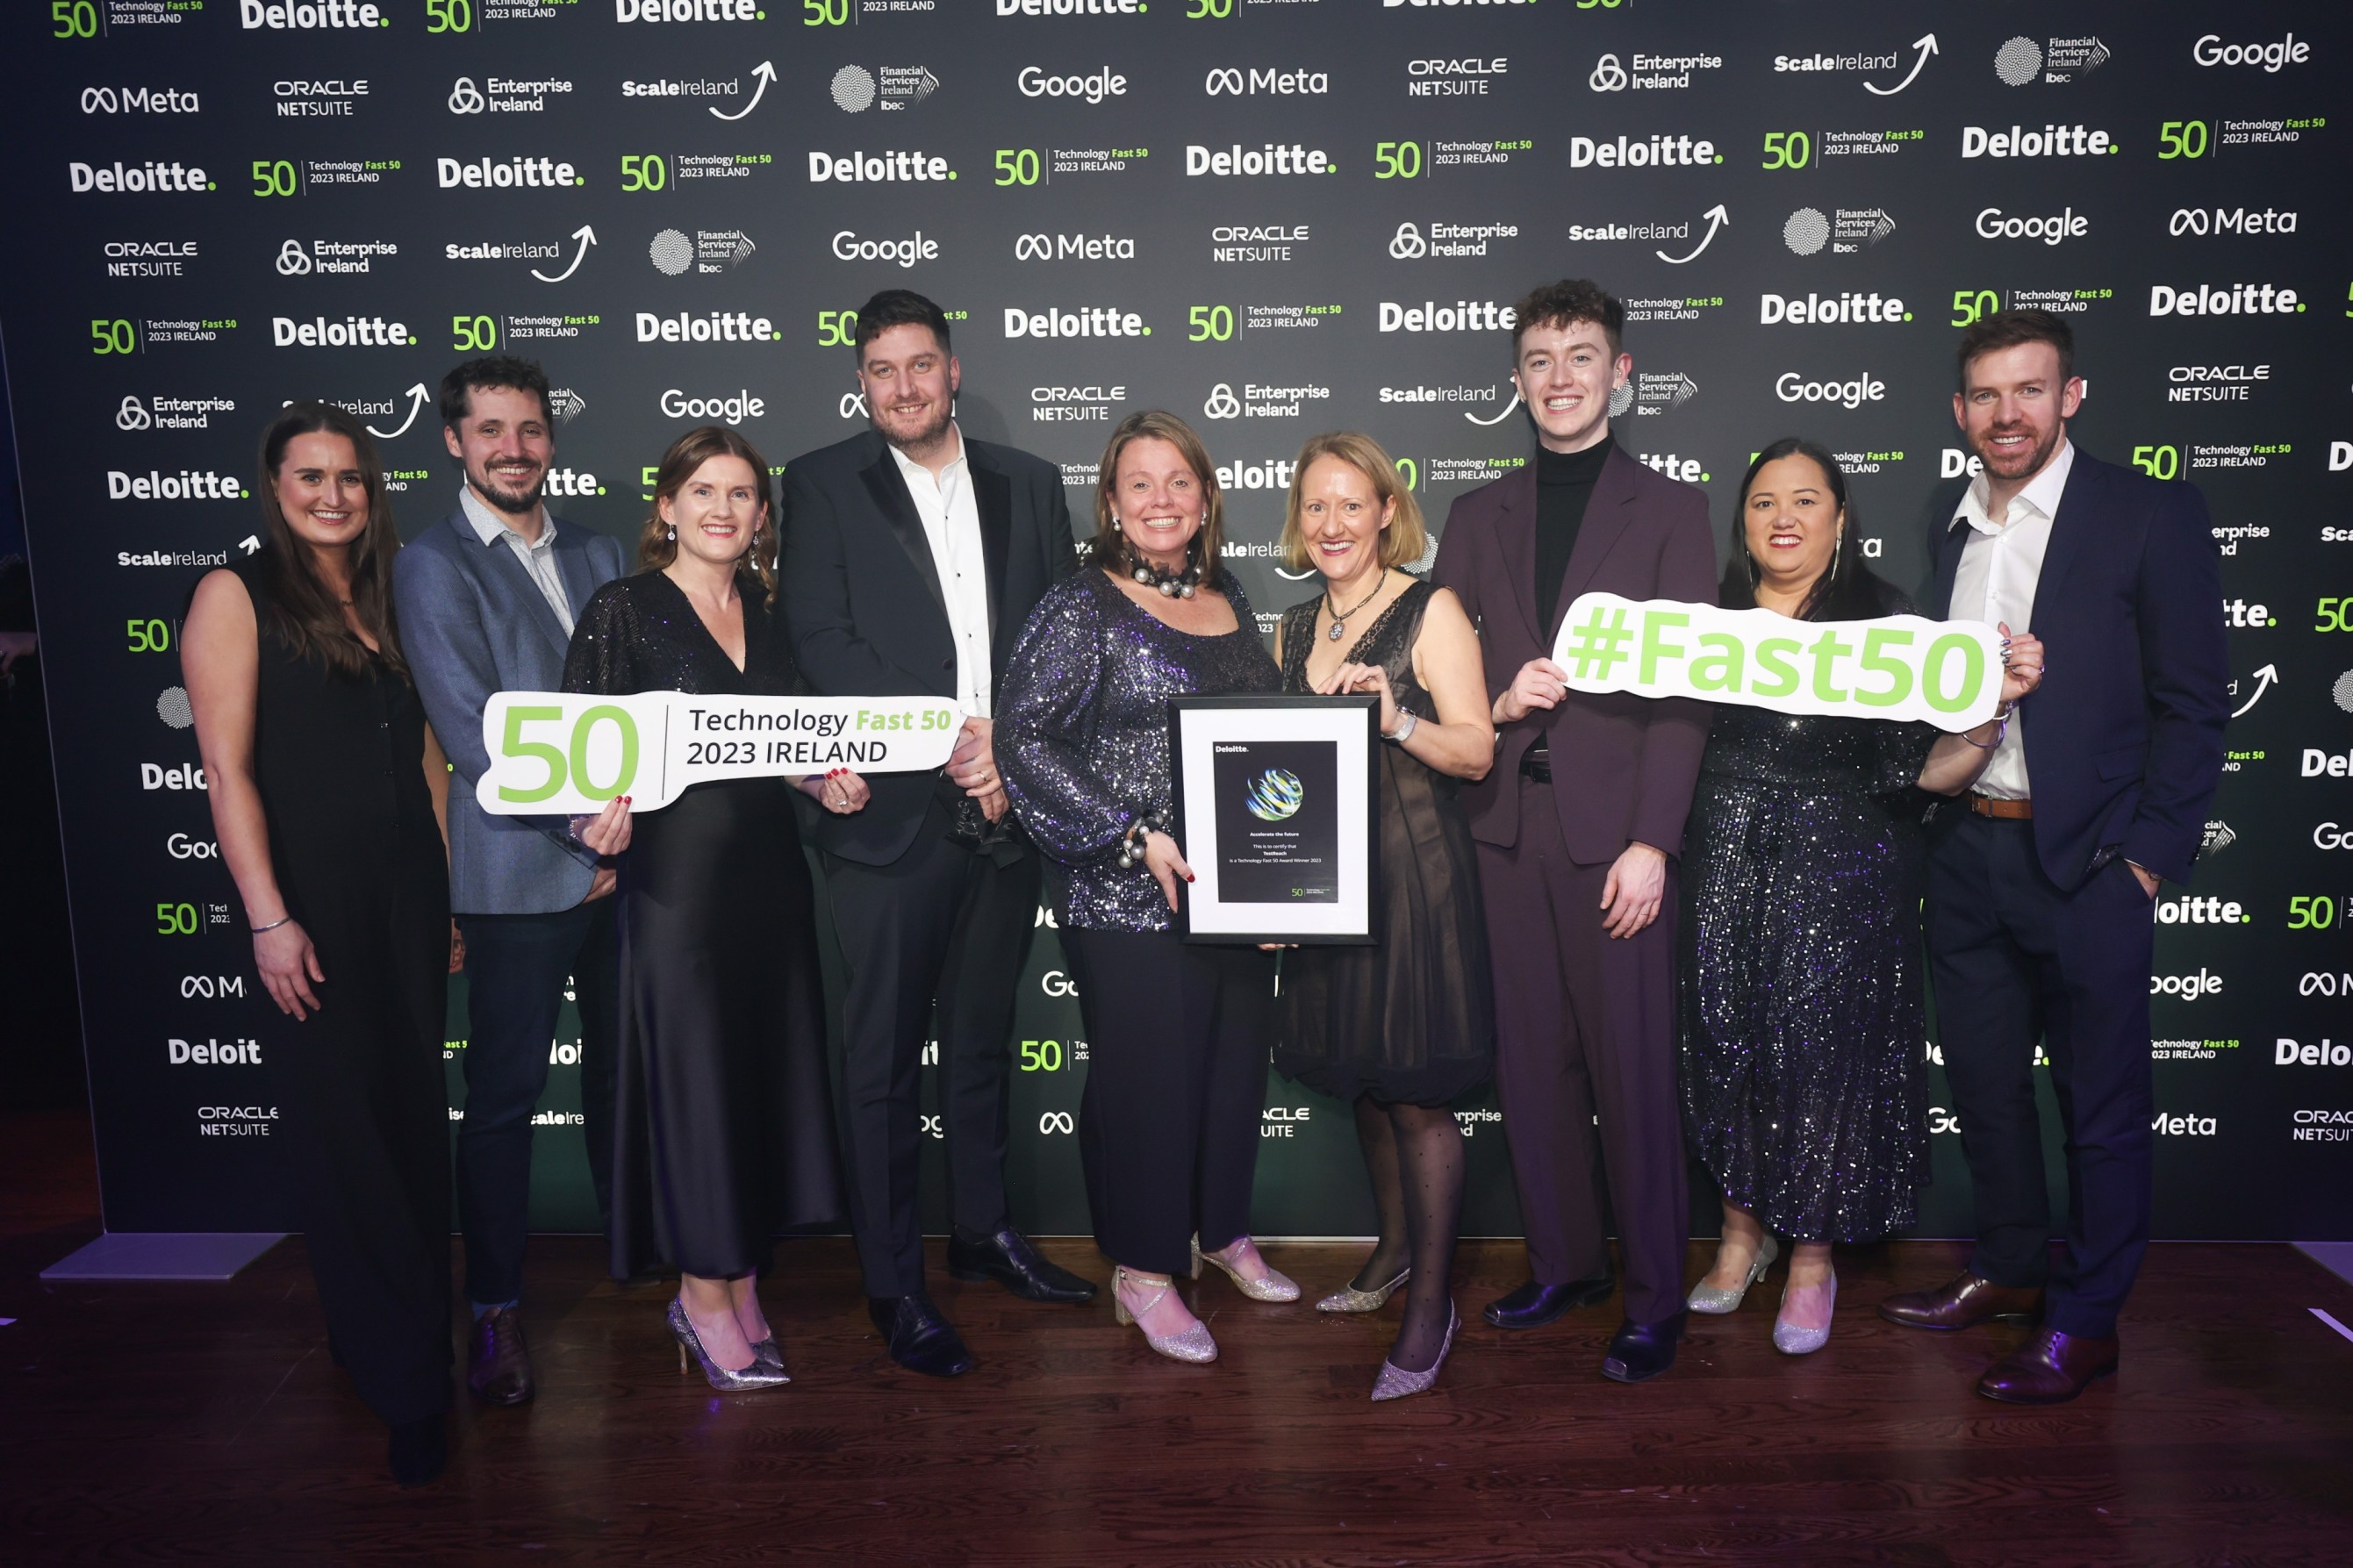 TestReach Takes Place Among Deloitte’s Technology Fast 50 Companies 2023.